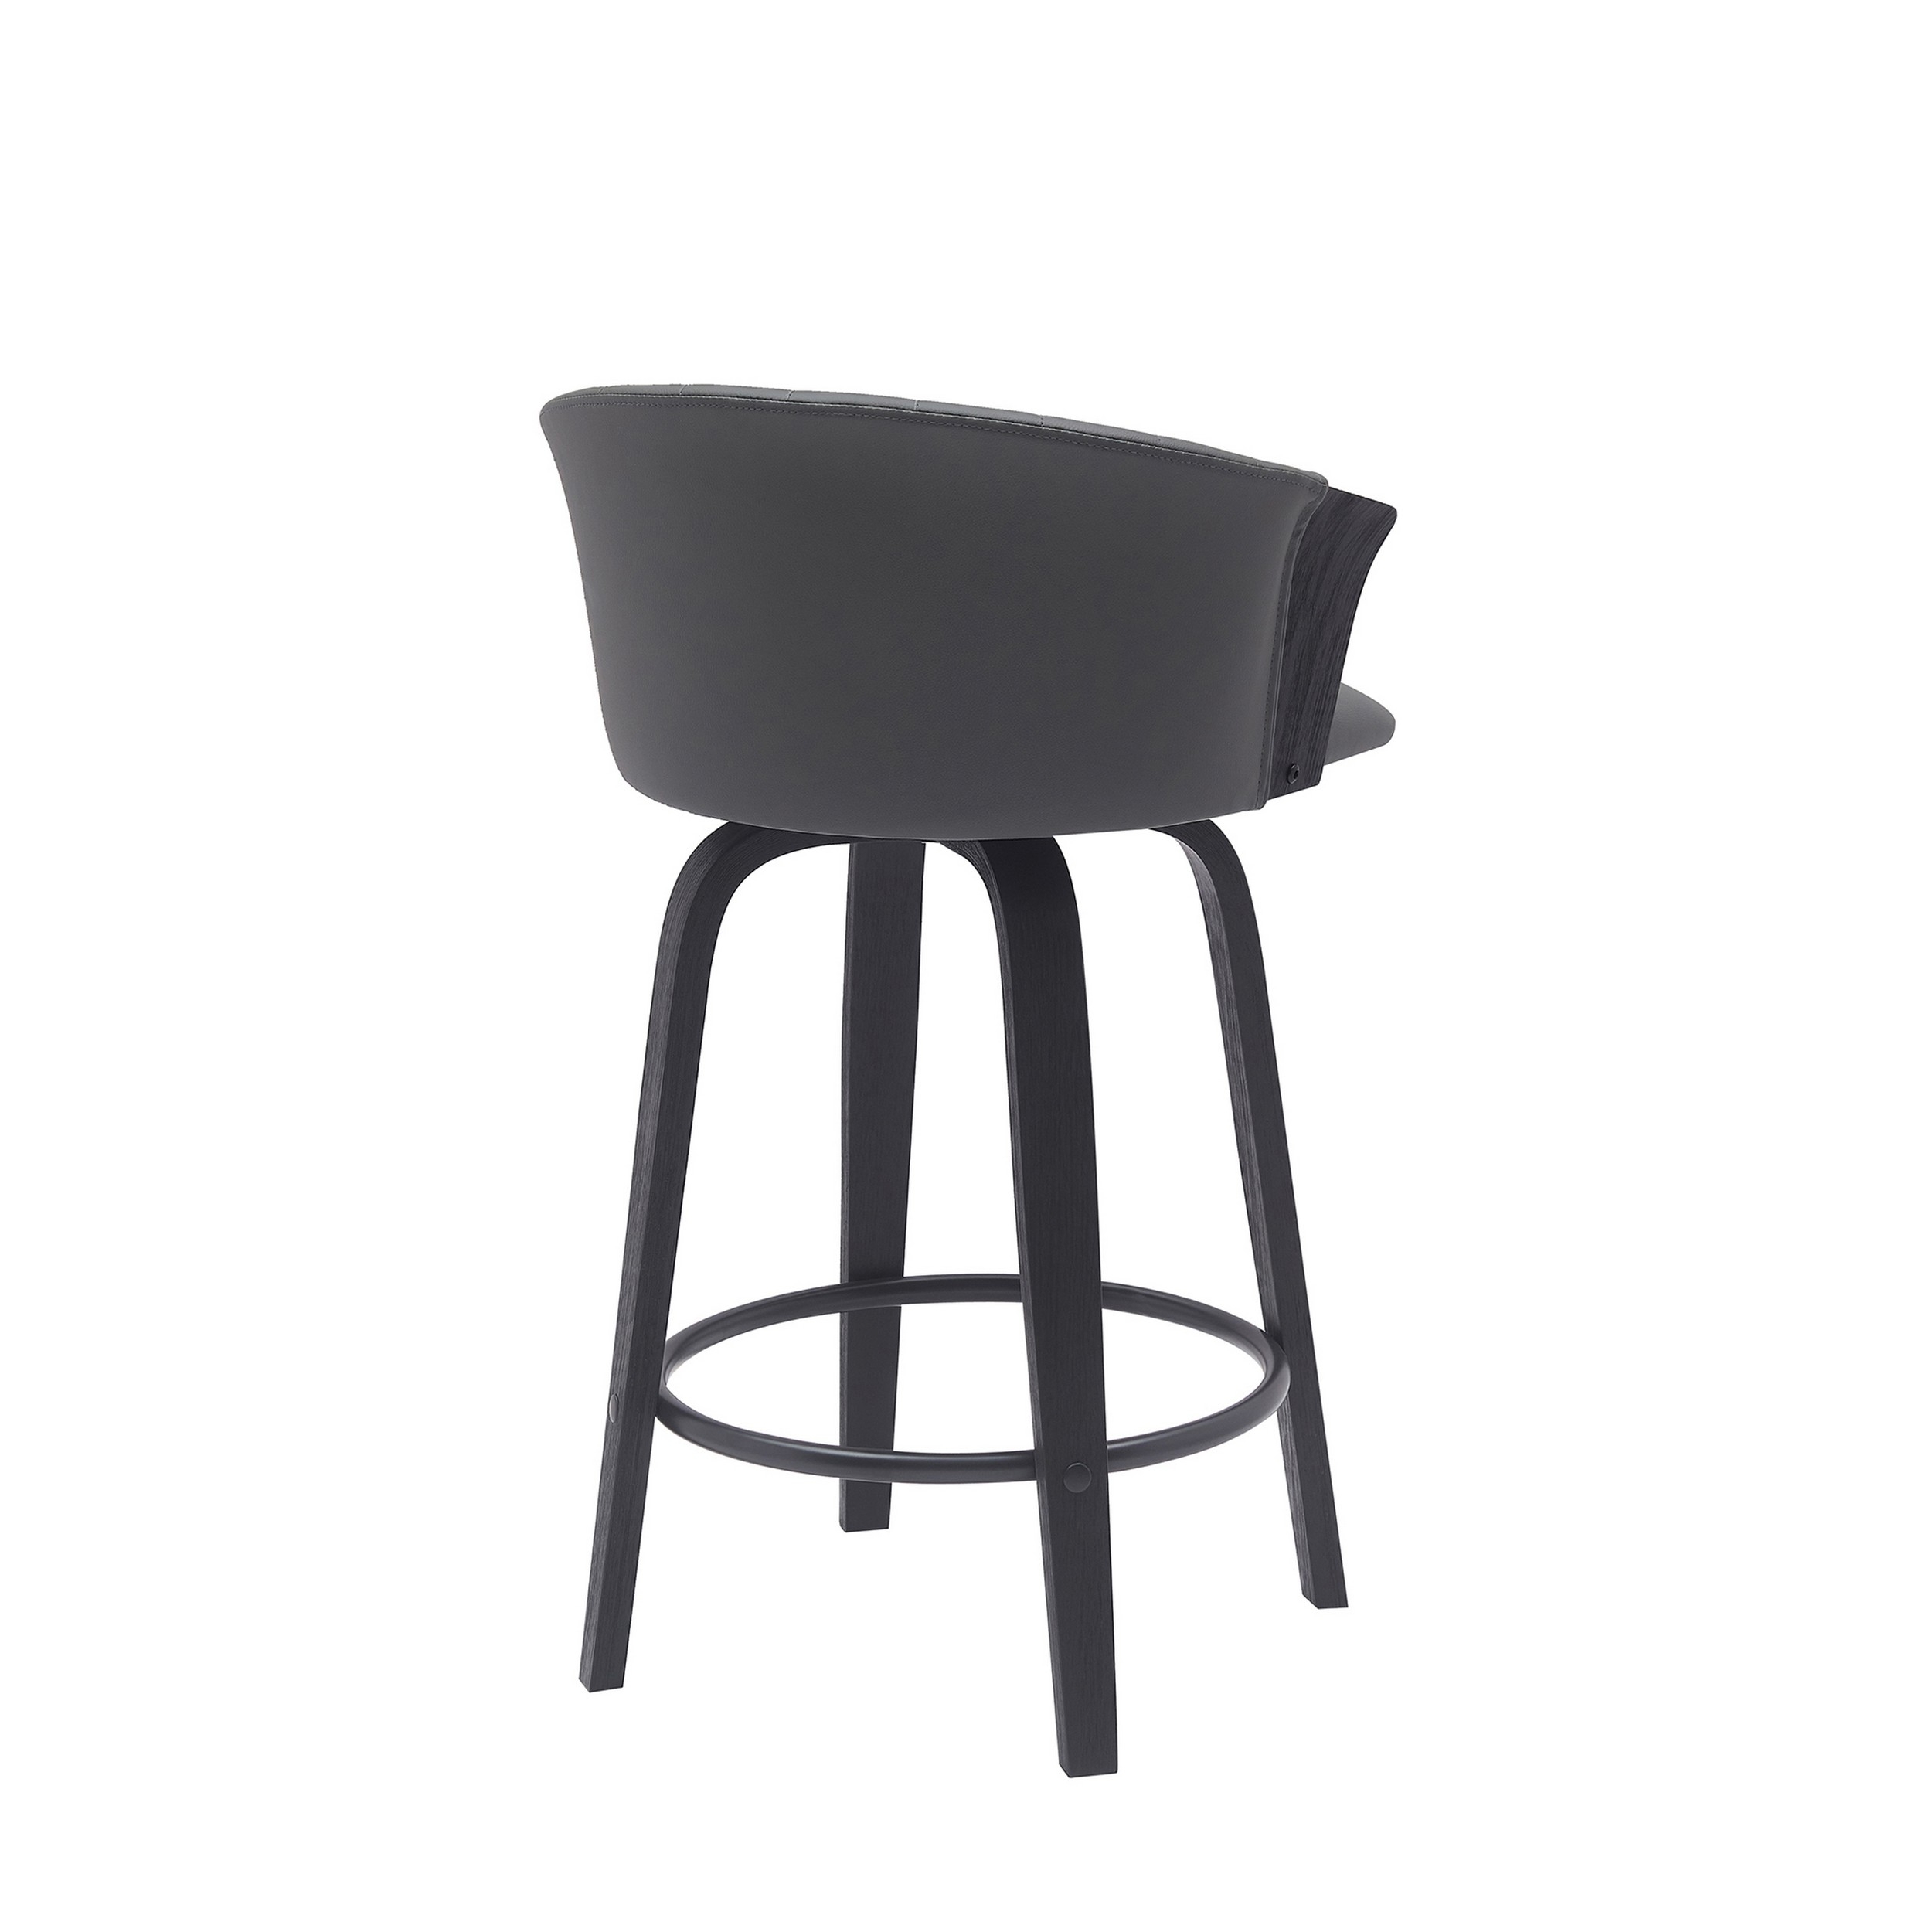 Oja 26 Inch Swivel Counter Stool Chair, Faux Leather, Curved, Black Wood - Saltoro Sherpi